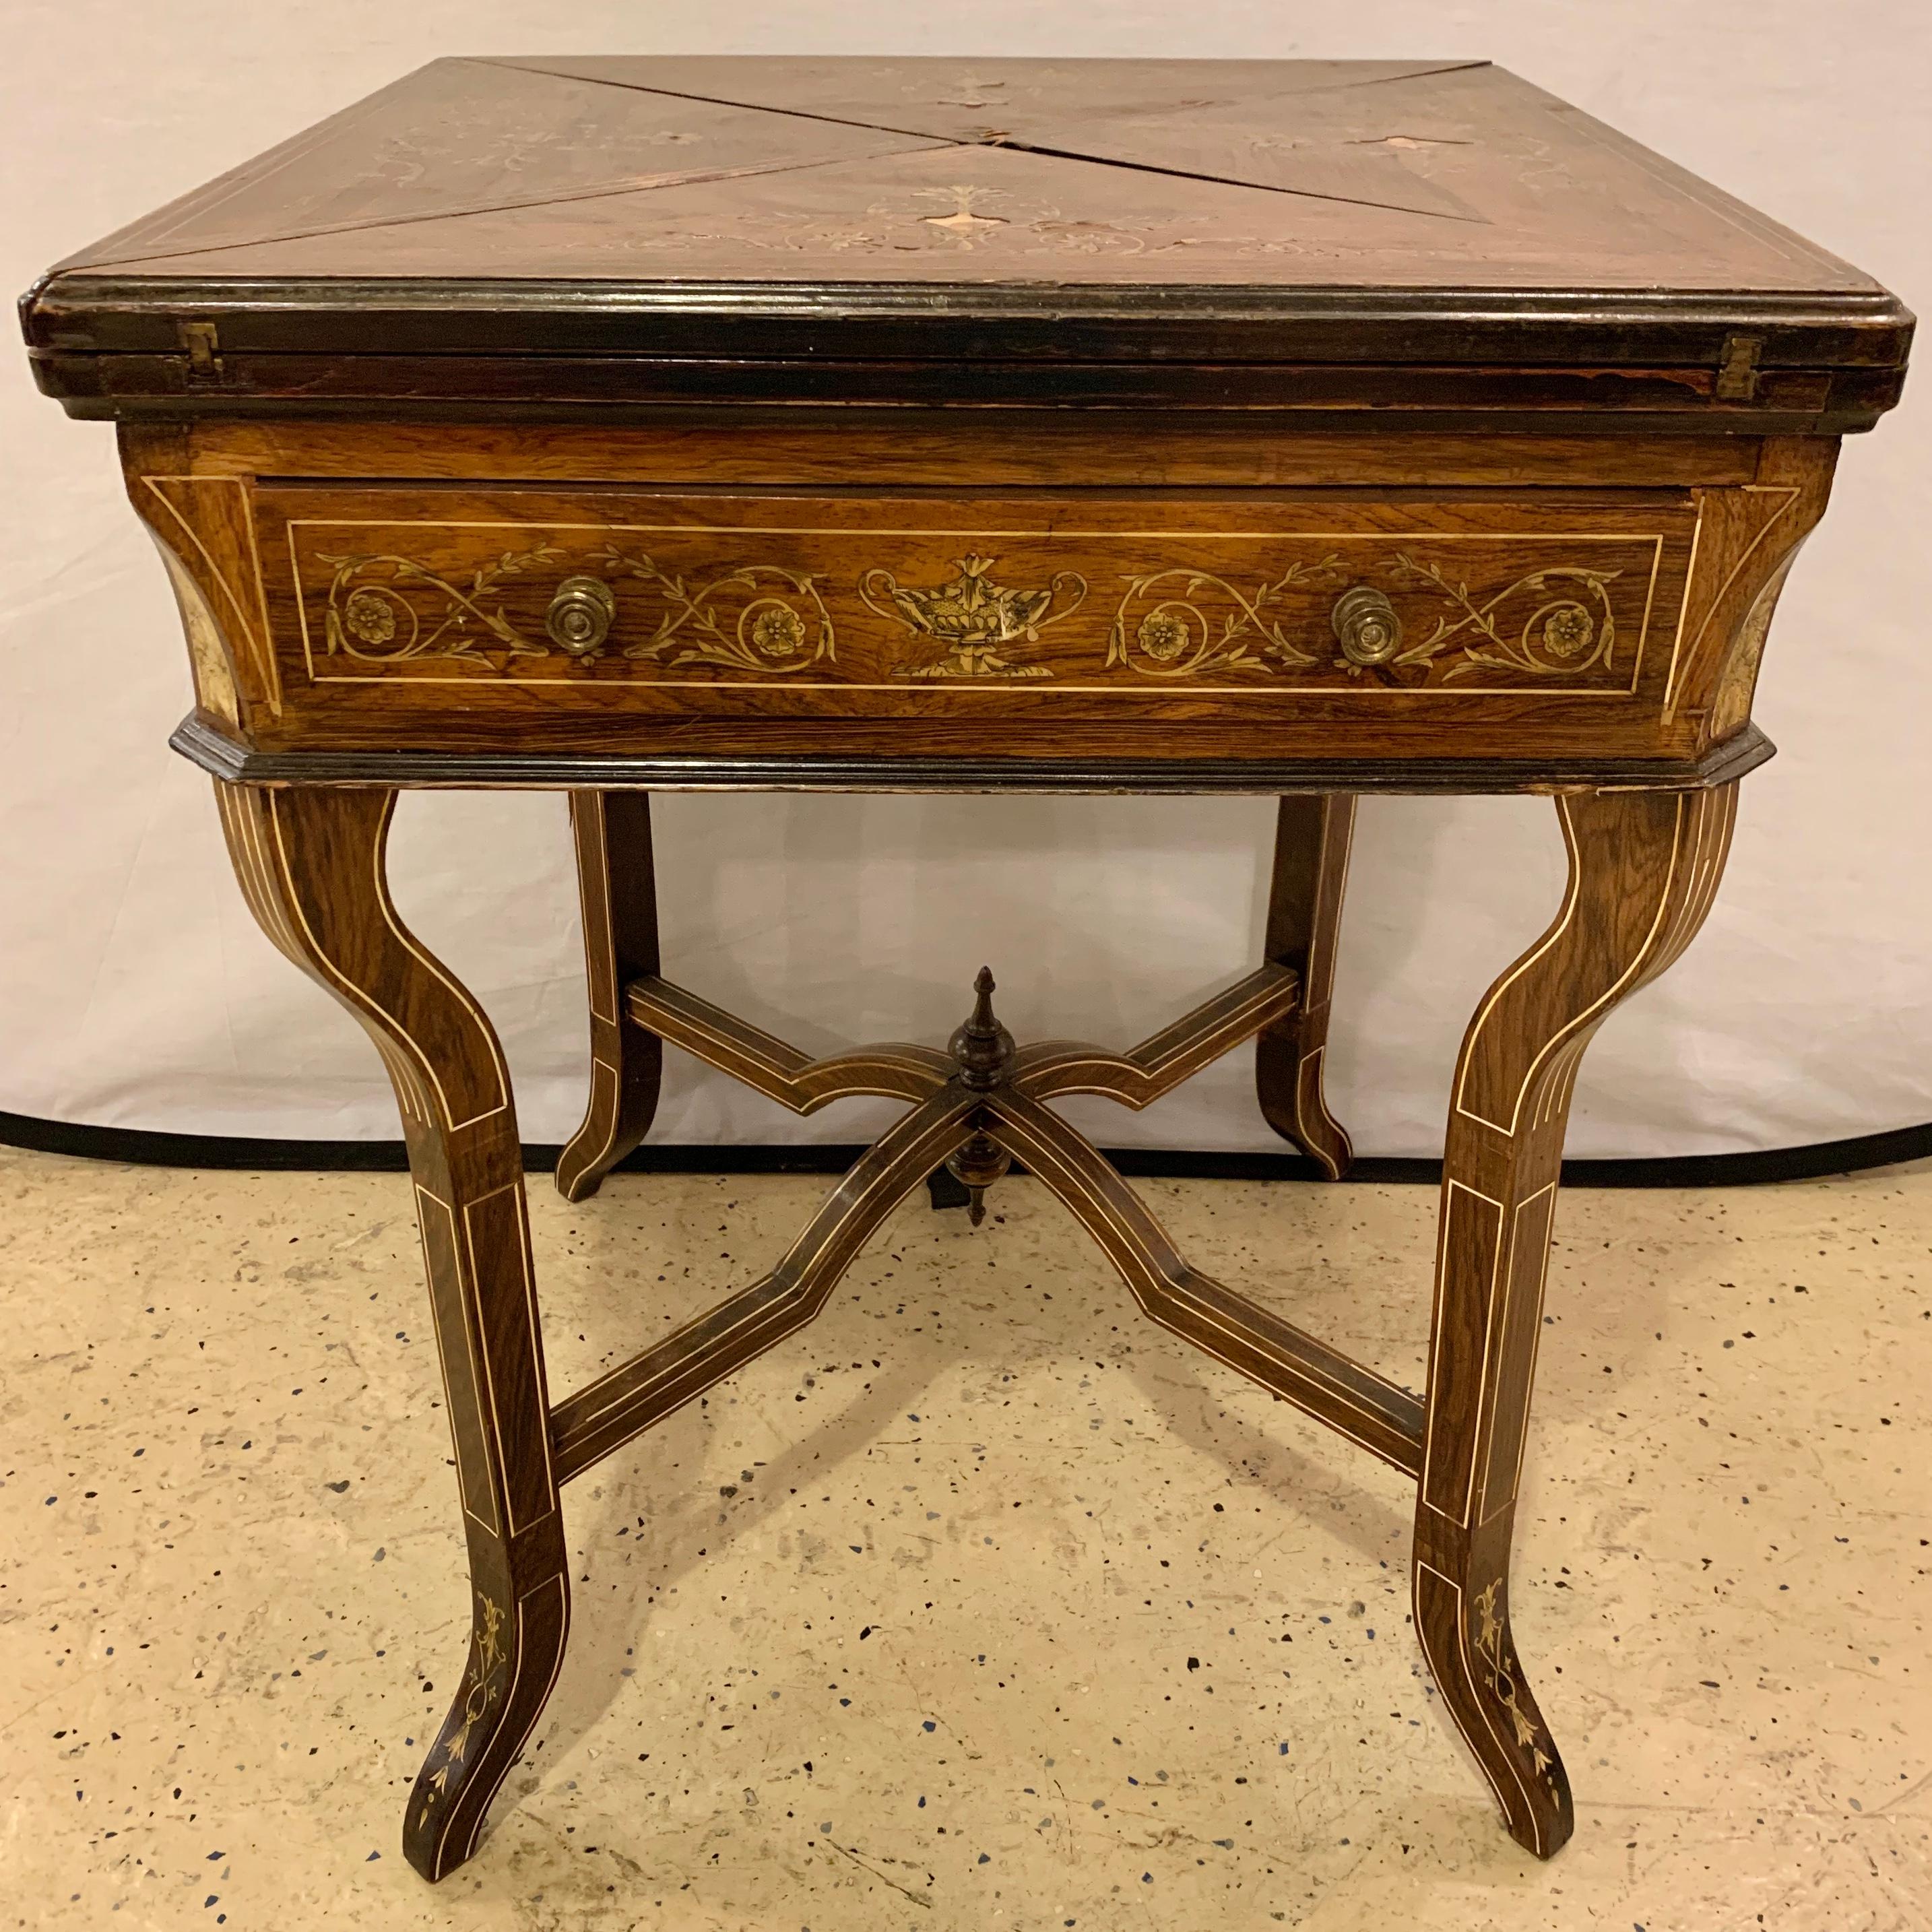 19th century rosewood English card table. A unique card table having a finely inlaid tabletop of rosewood having an open handkerchief form leading to a felt center with cup or chip indentations. The case with a single drawer and all-over inlays of